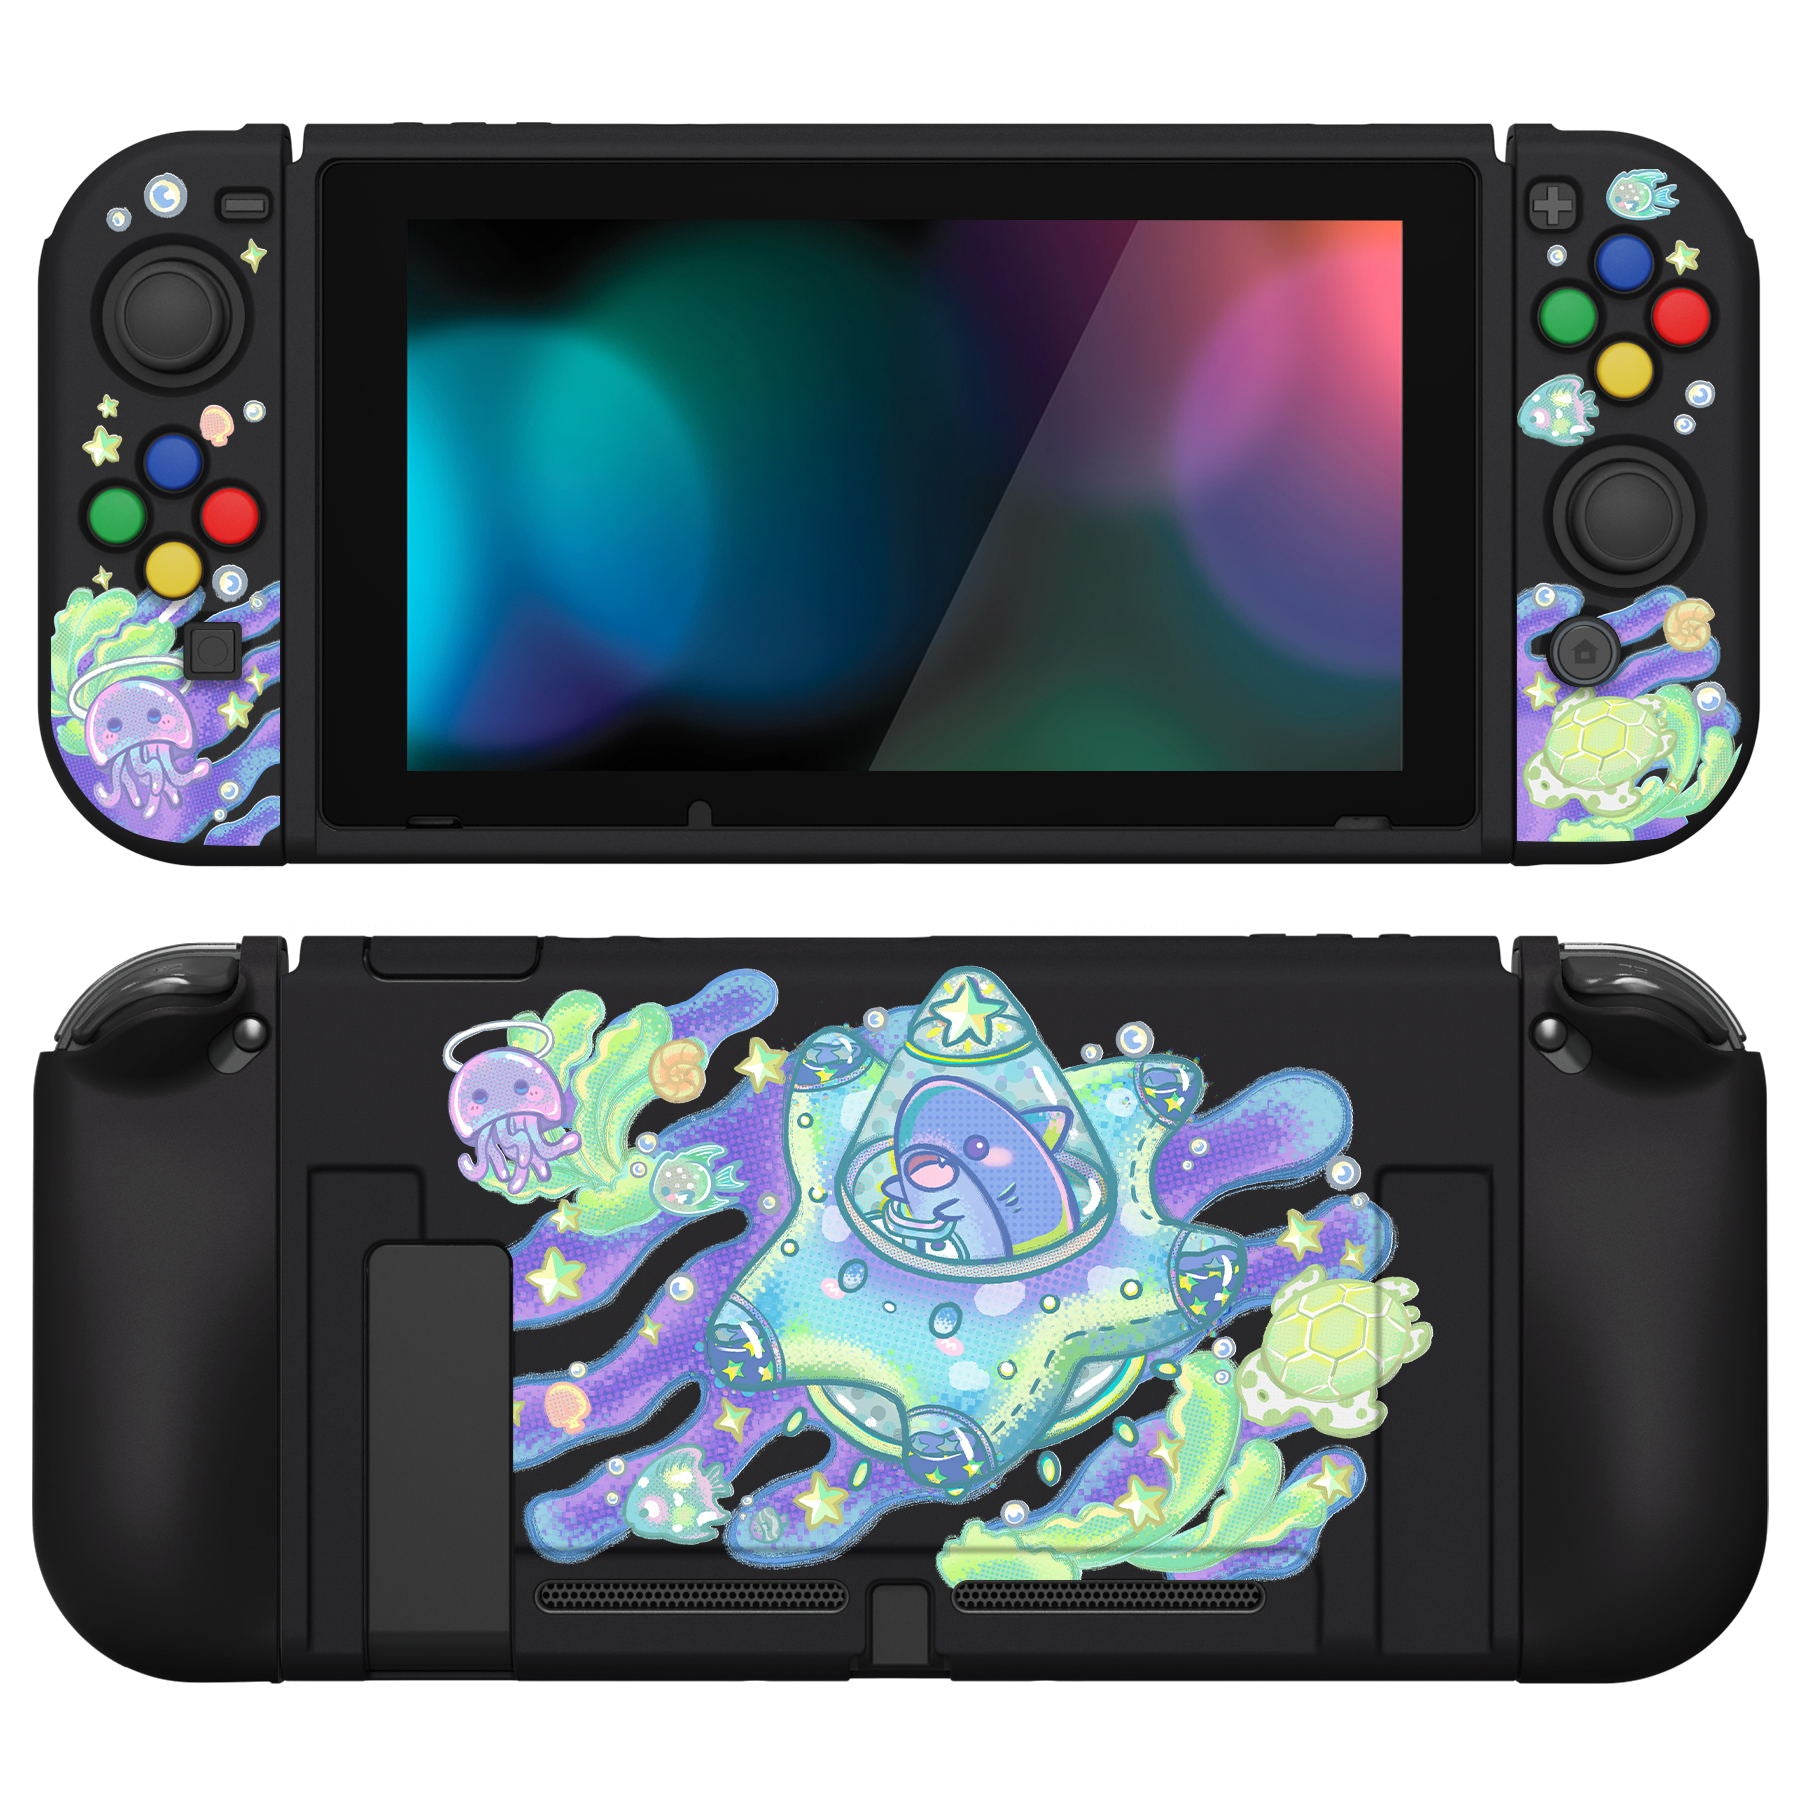 PlayVital ZealProtect Soft Protective Case for Nintendo Switch, Flexible Cover for Switch with Tempered Glass Screen Protector & Thumb Grips & ABXY Direction Button Caps - Shark Quest - RNSYV6039 playvital